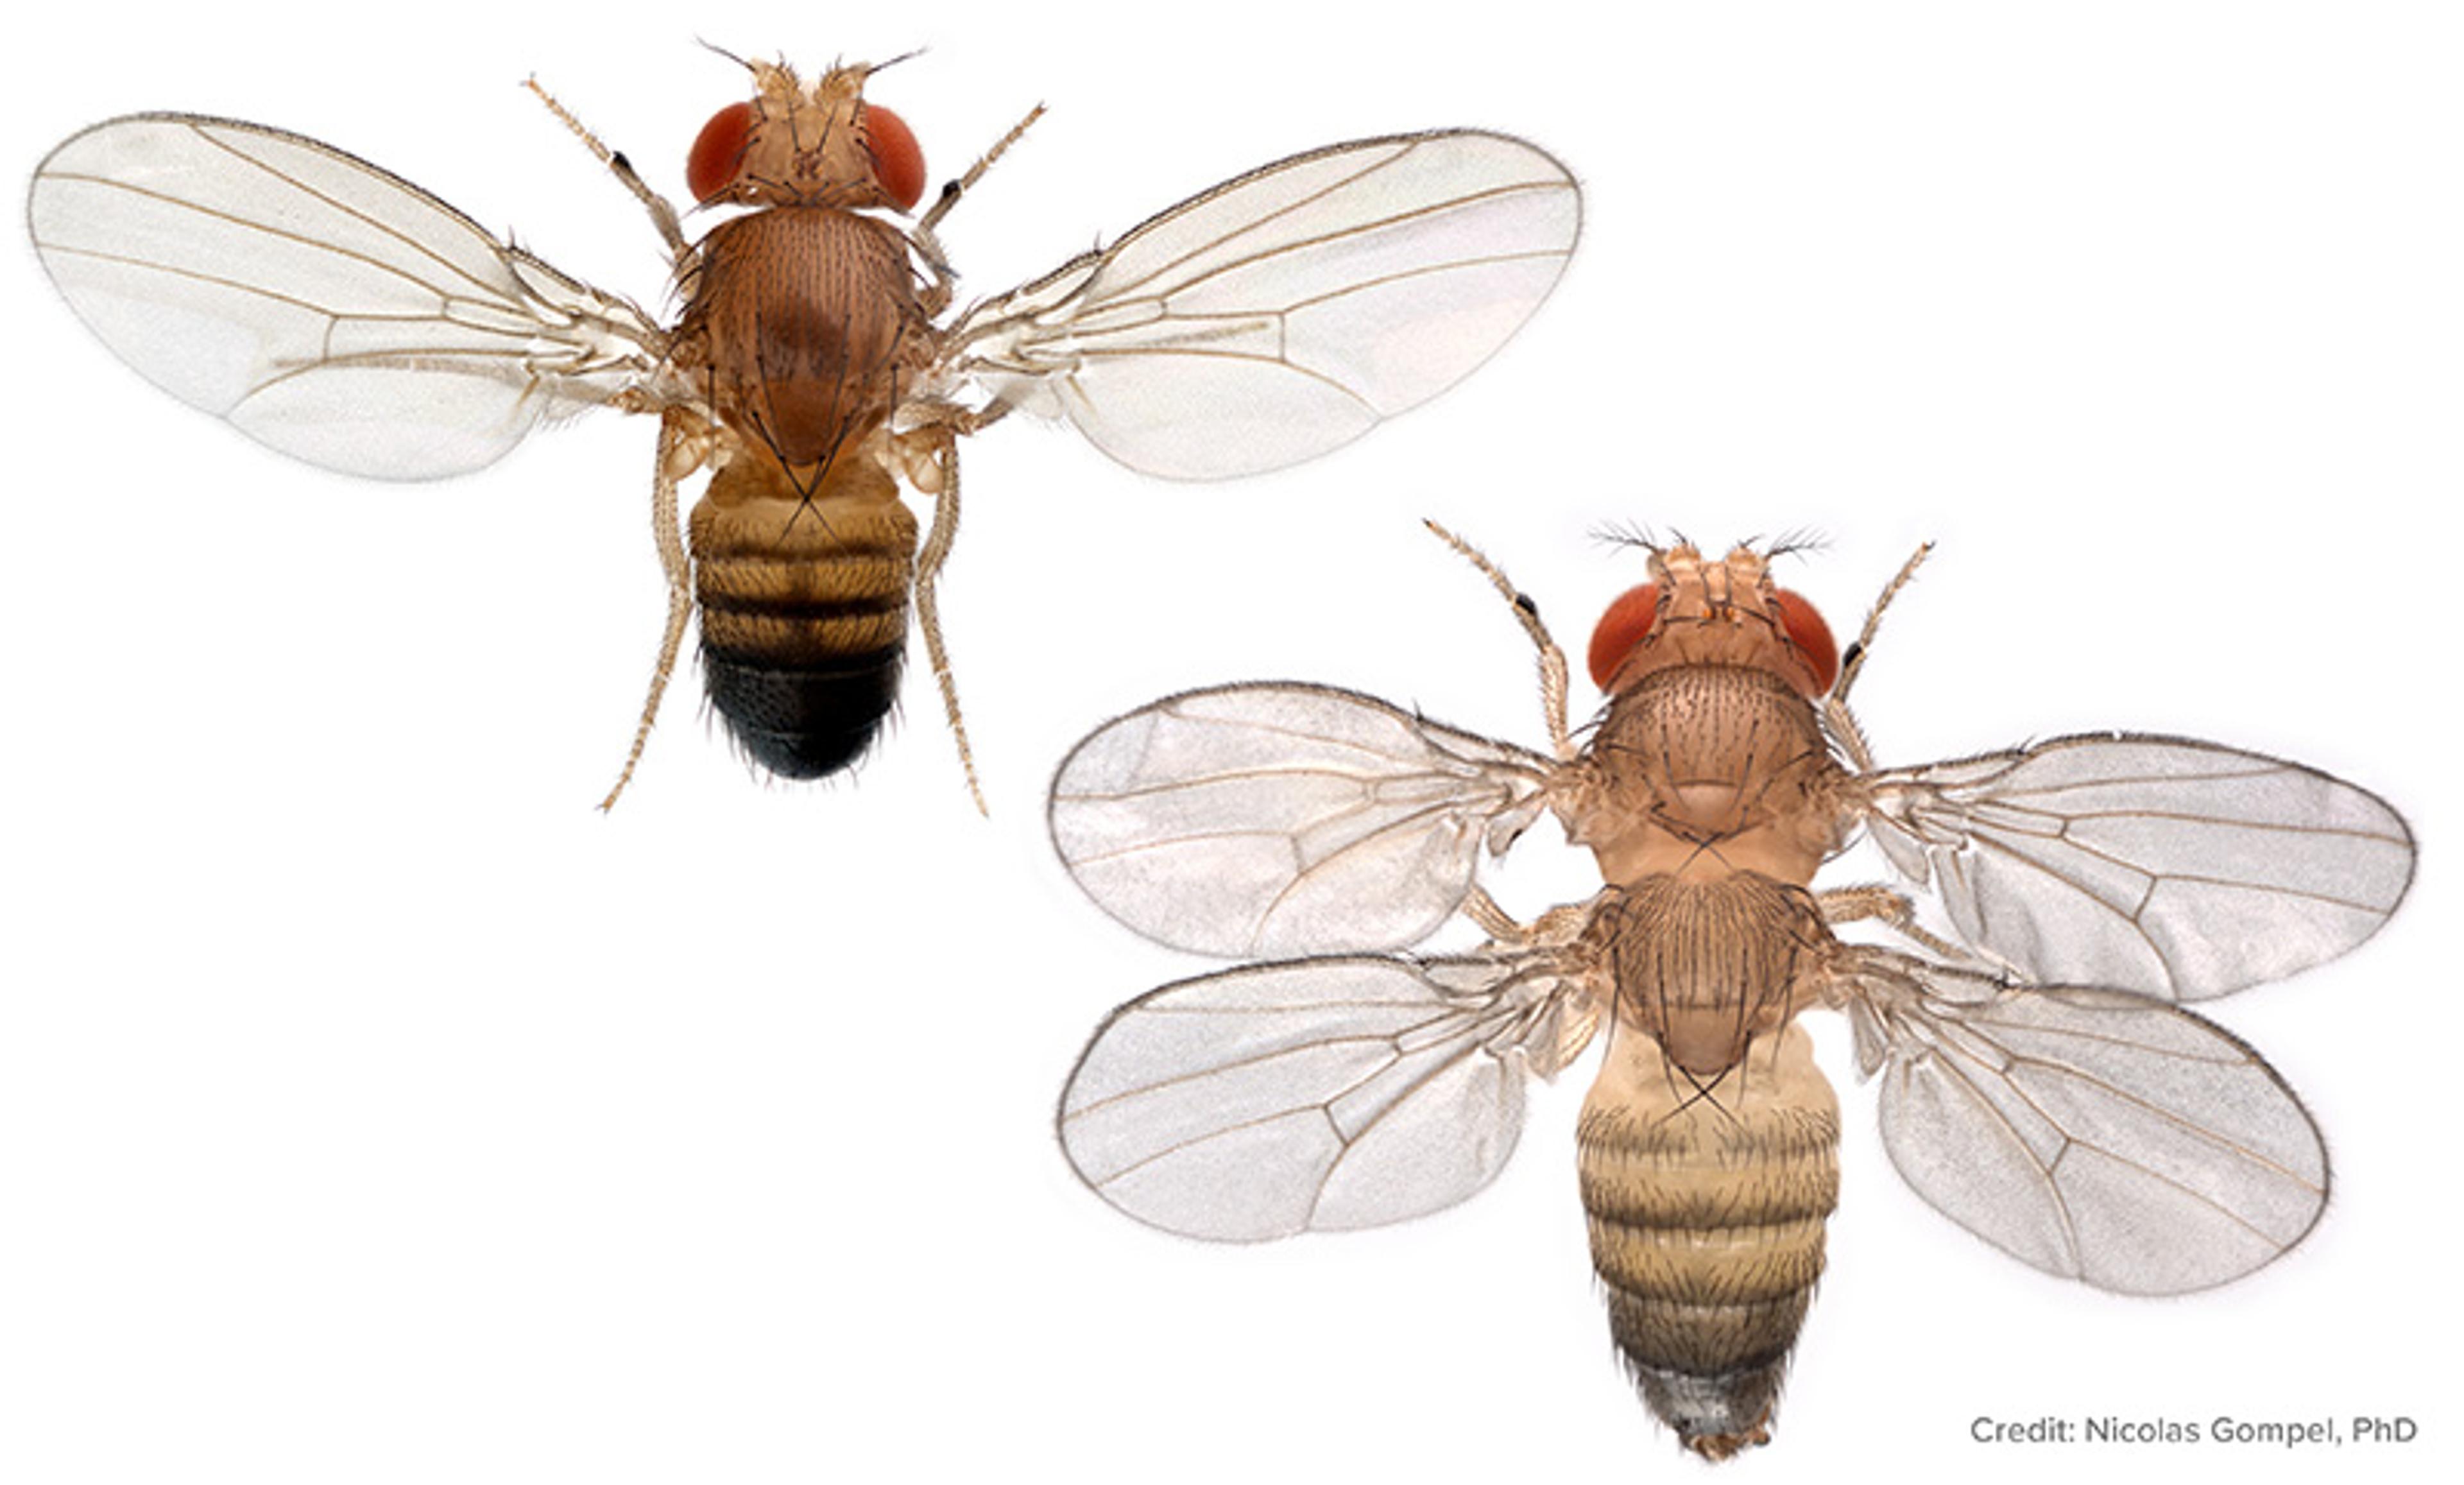 Two fruit flies with red eyes are shown from above against a white background. The fly on the left has a darker, striped abdomen, while the fly on the right has a lighter, striped abdomen. Both have translucent wings and are detailed in appearance. Credit to Nicolas Gompel, PhD.